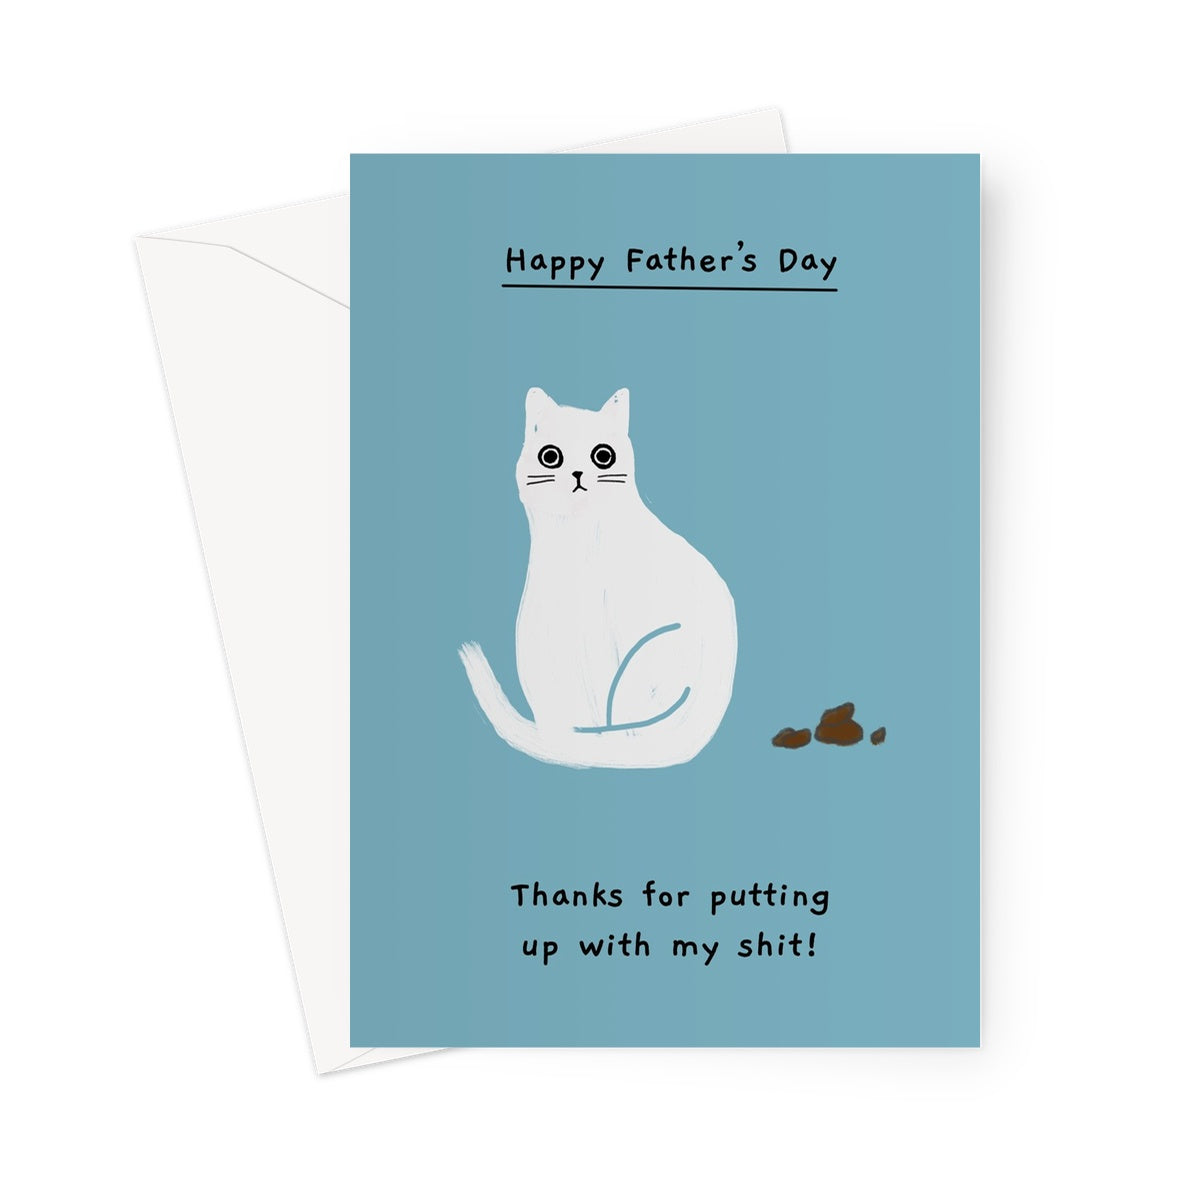 Ken the cat Father's Day card - Thanks for putting up with my shit - Ken sitting next to poo on teal background